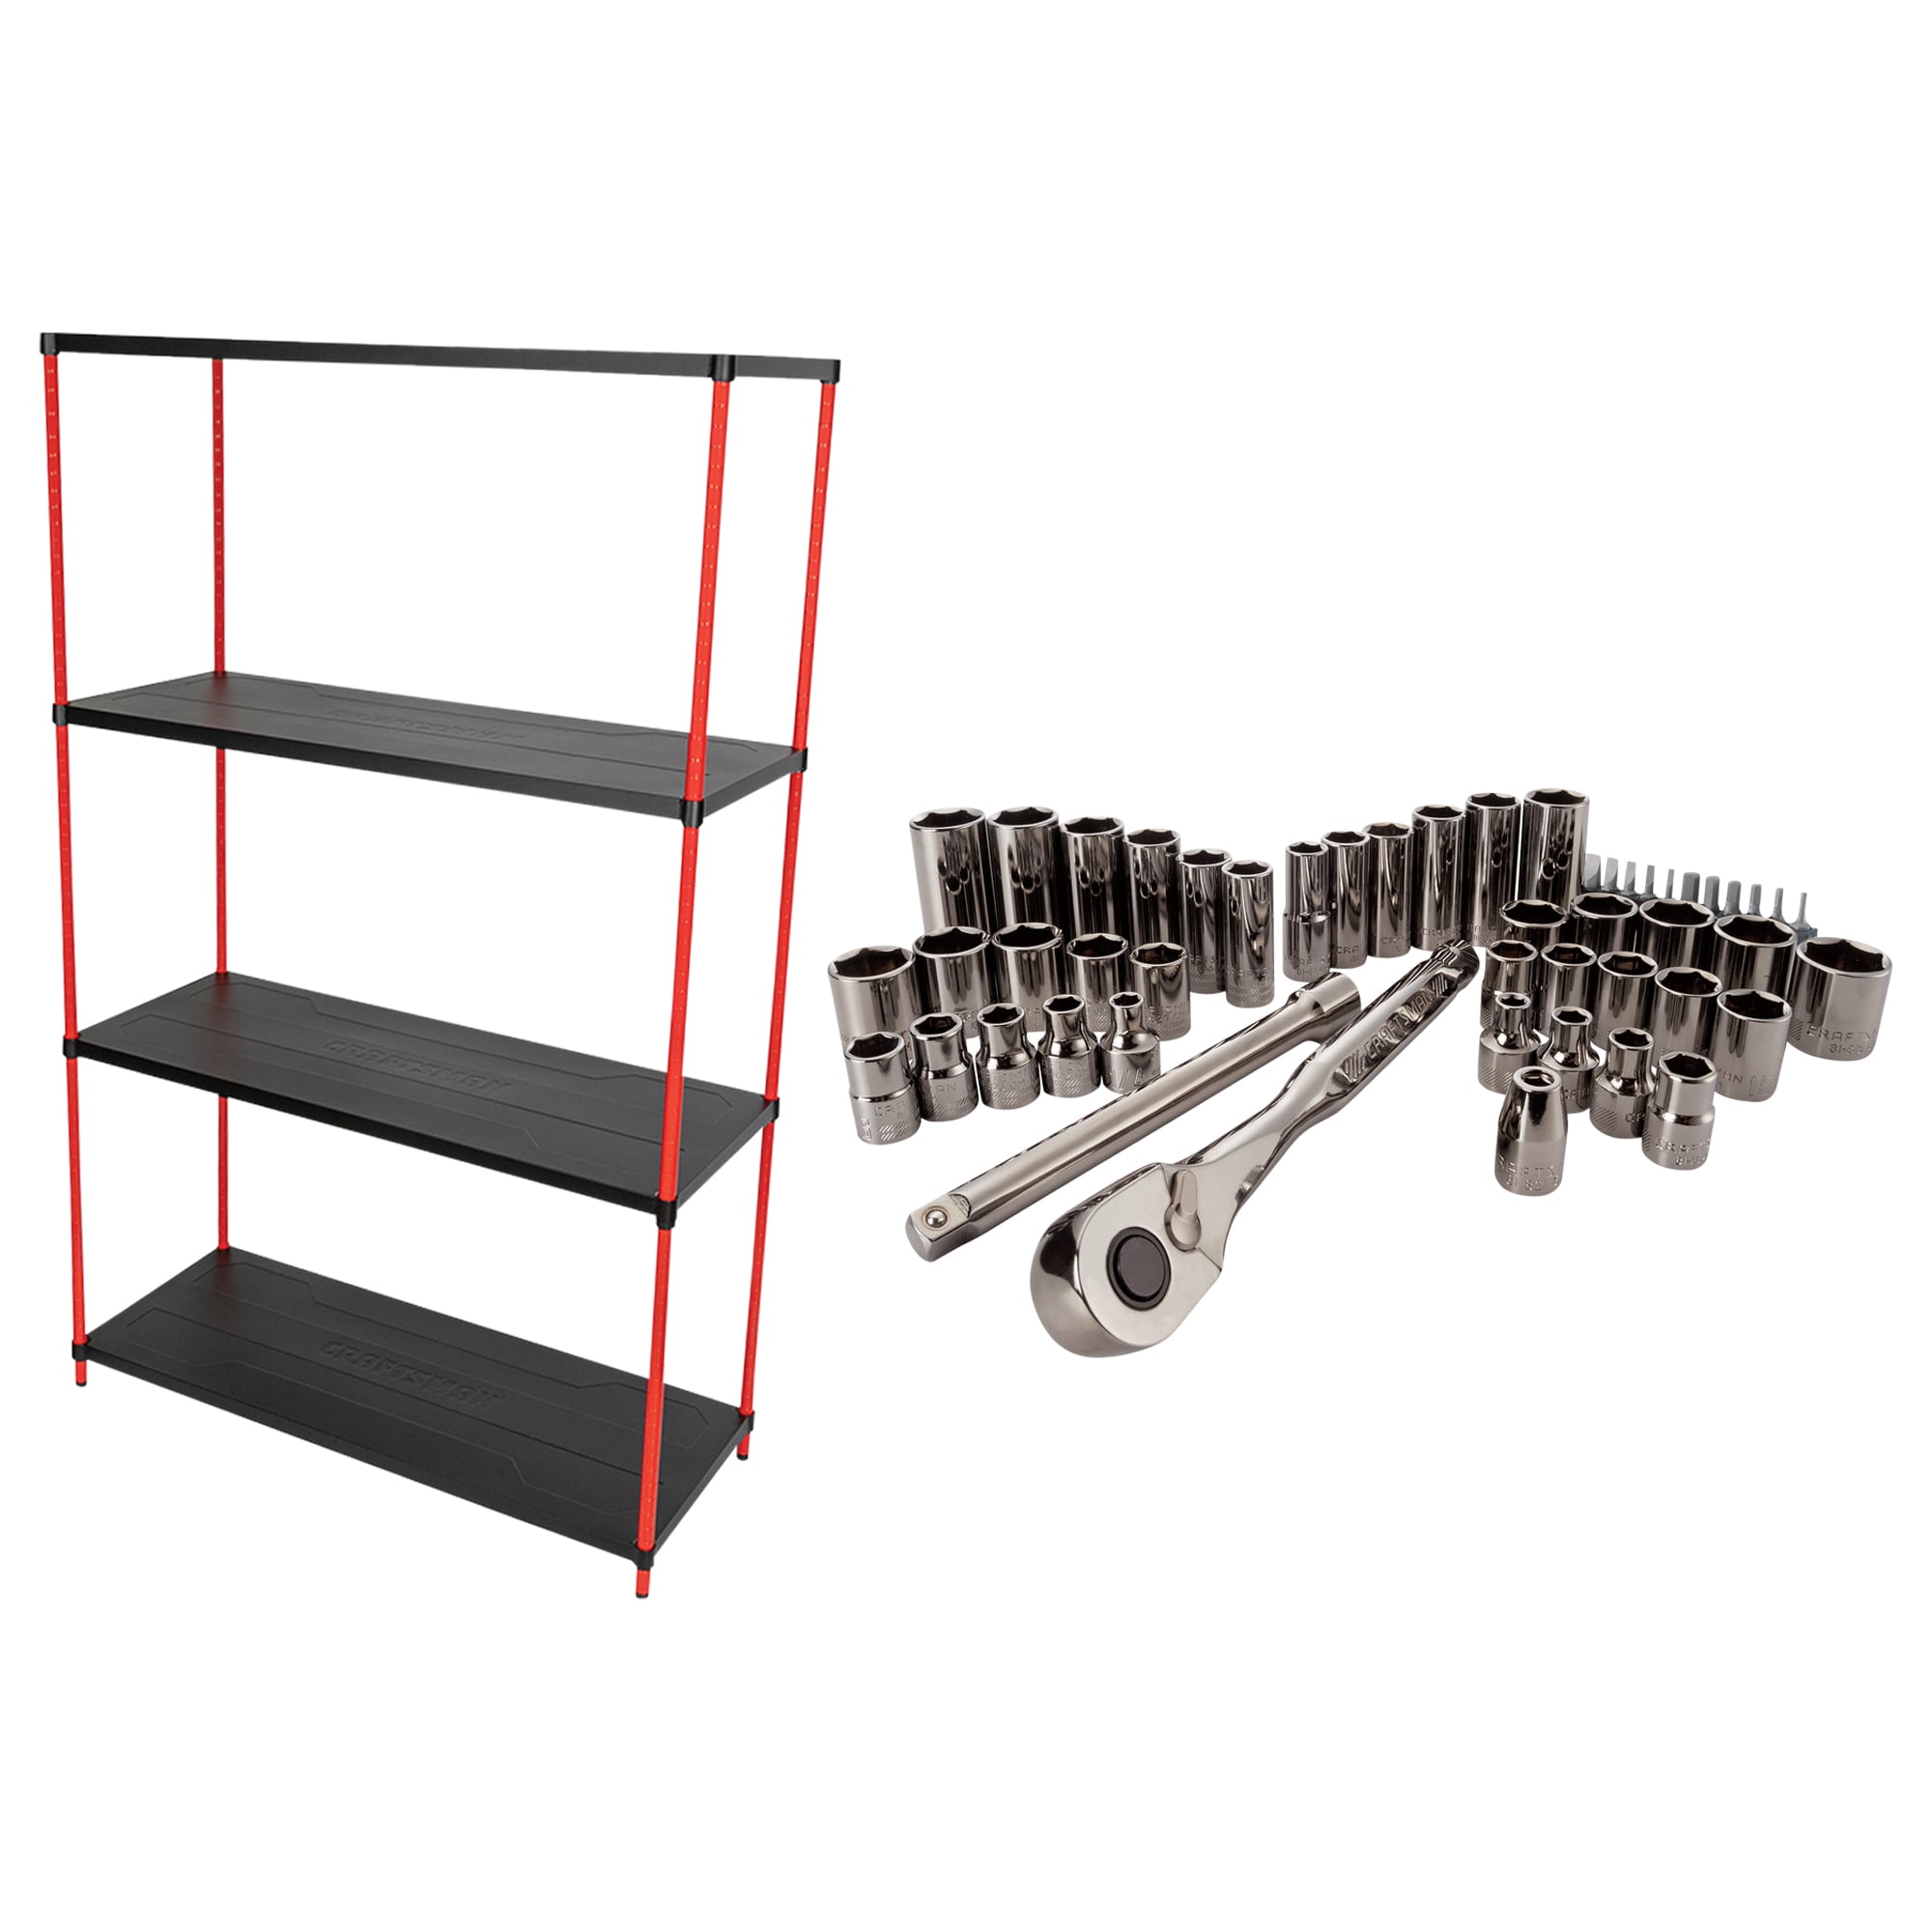 CRAFTSMAN Steel 4-Tier Utility Shelving Unit (45-in W x 18-in D x 72-in H) & Portable 20.5-in Ball-bearing 3-Drawer Red Steel Lockable Tool Box